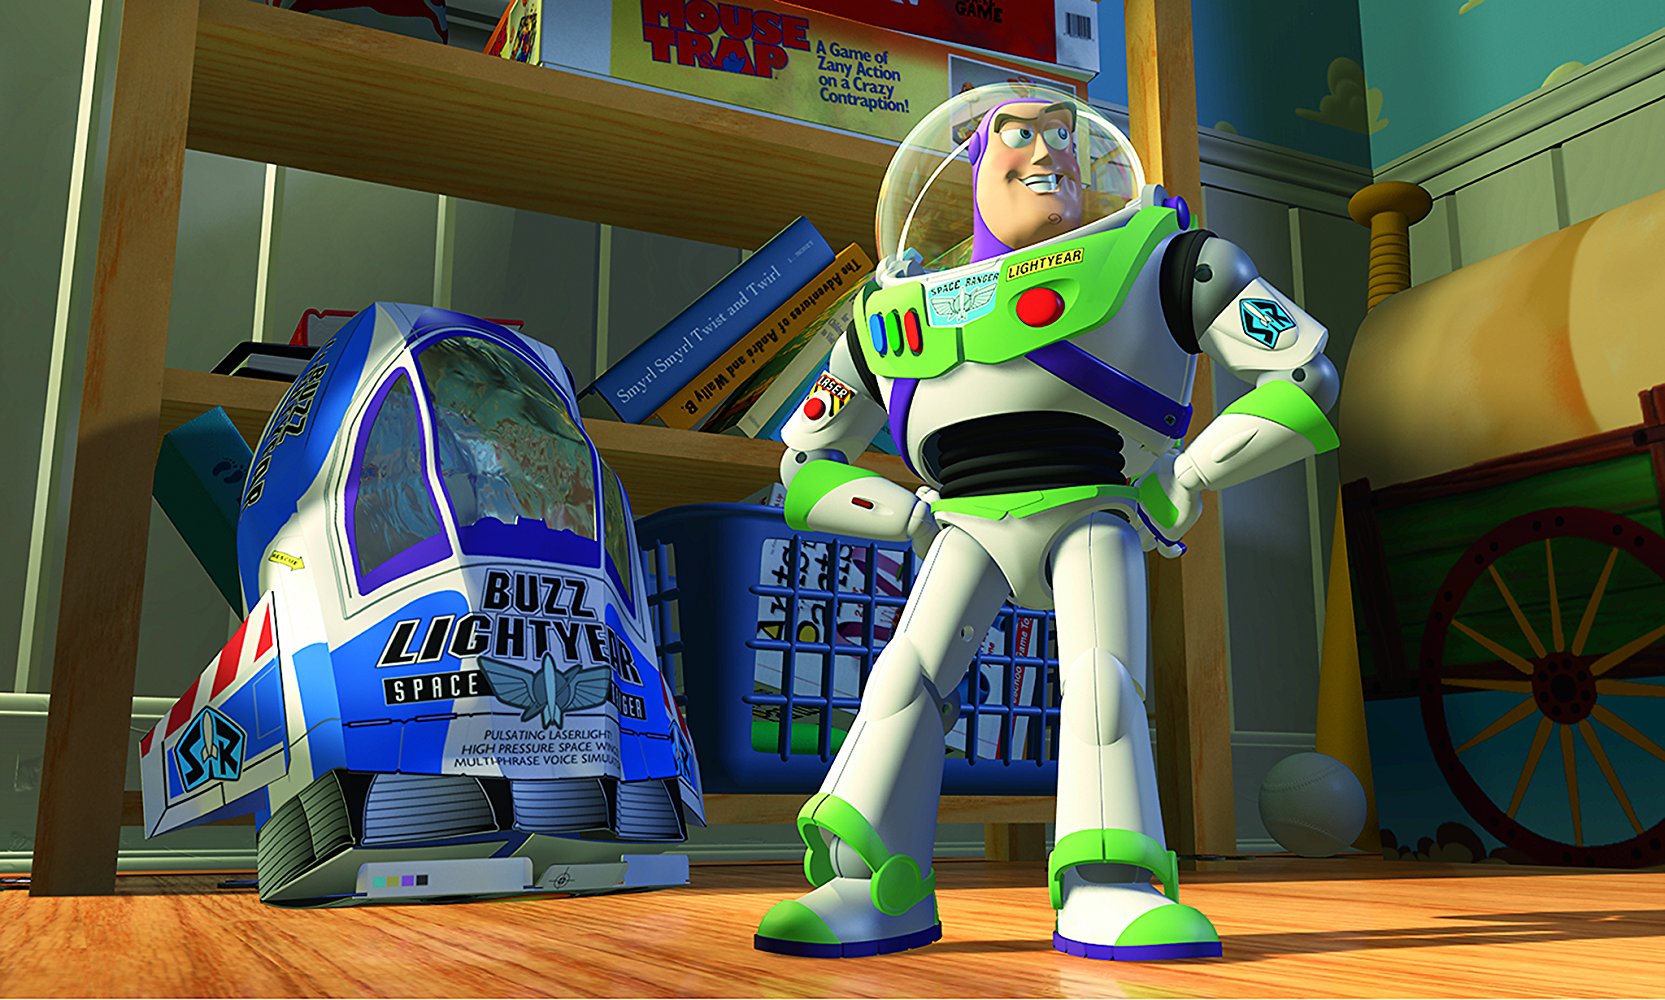 All about Buzz Lightyear on Tornado Movies! List of films with a